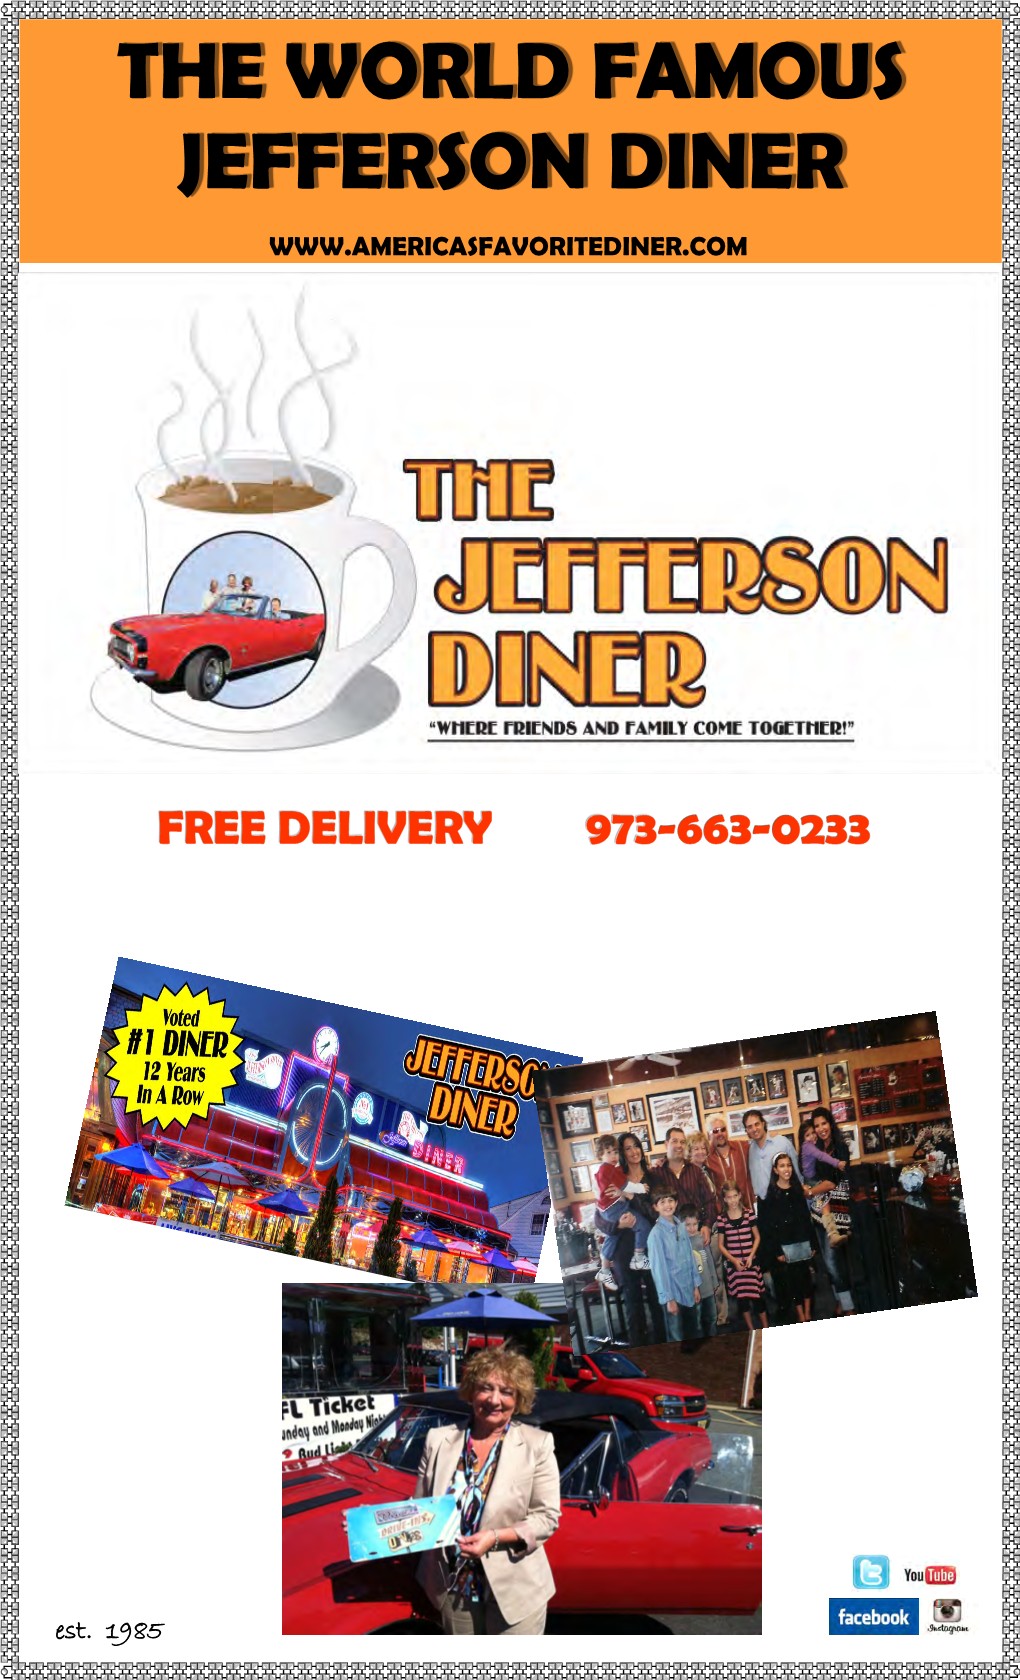 The World Famous Jefferson Diner